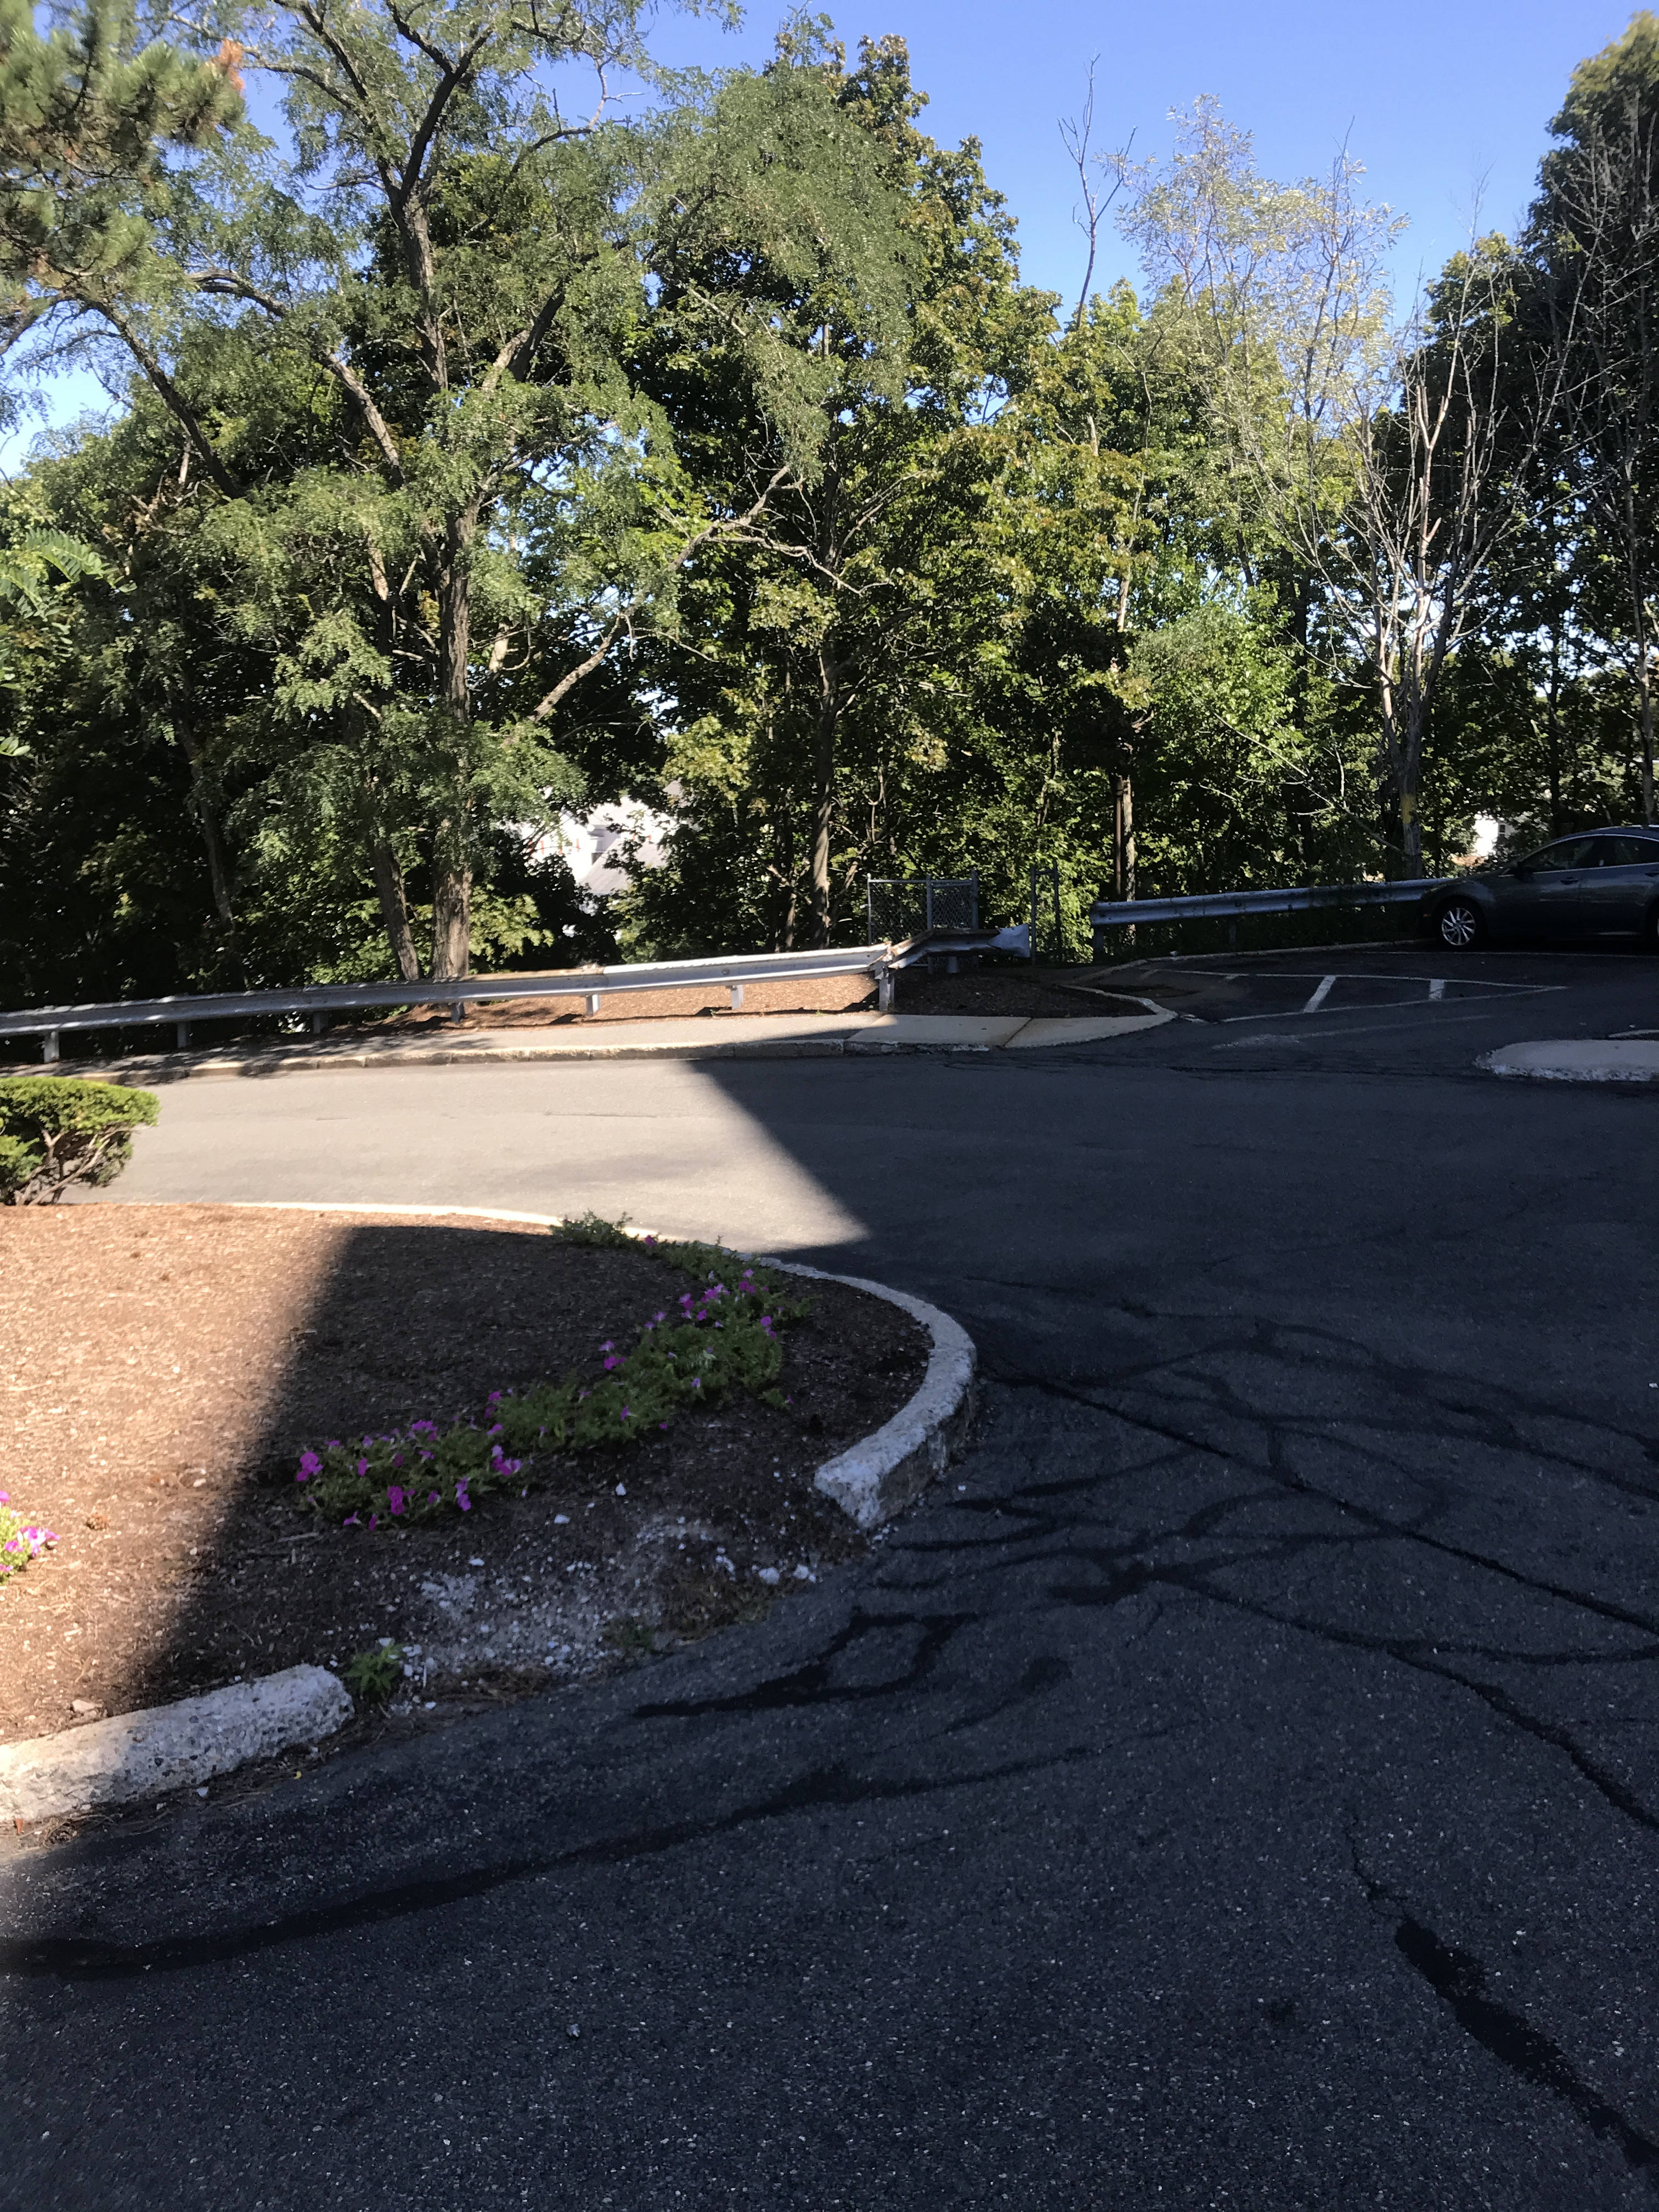 The top of a driveway, curving out of view and down a slope to the left